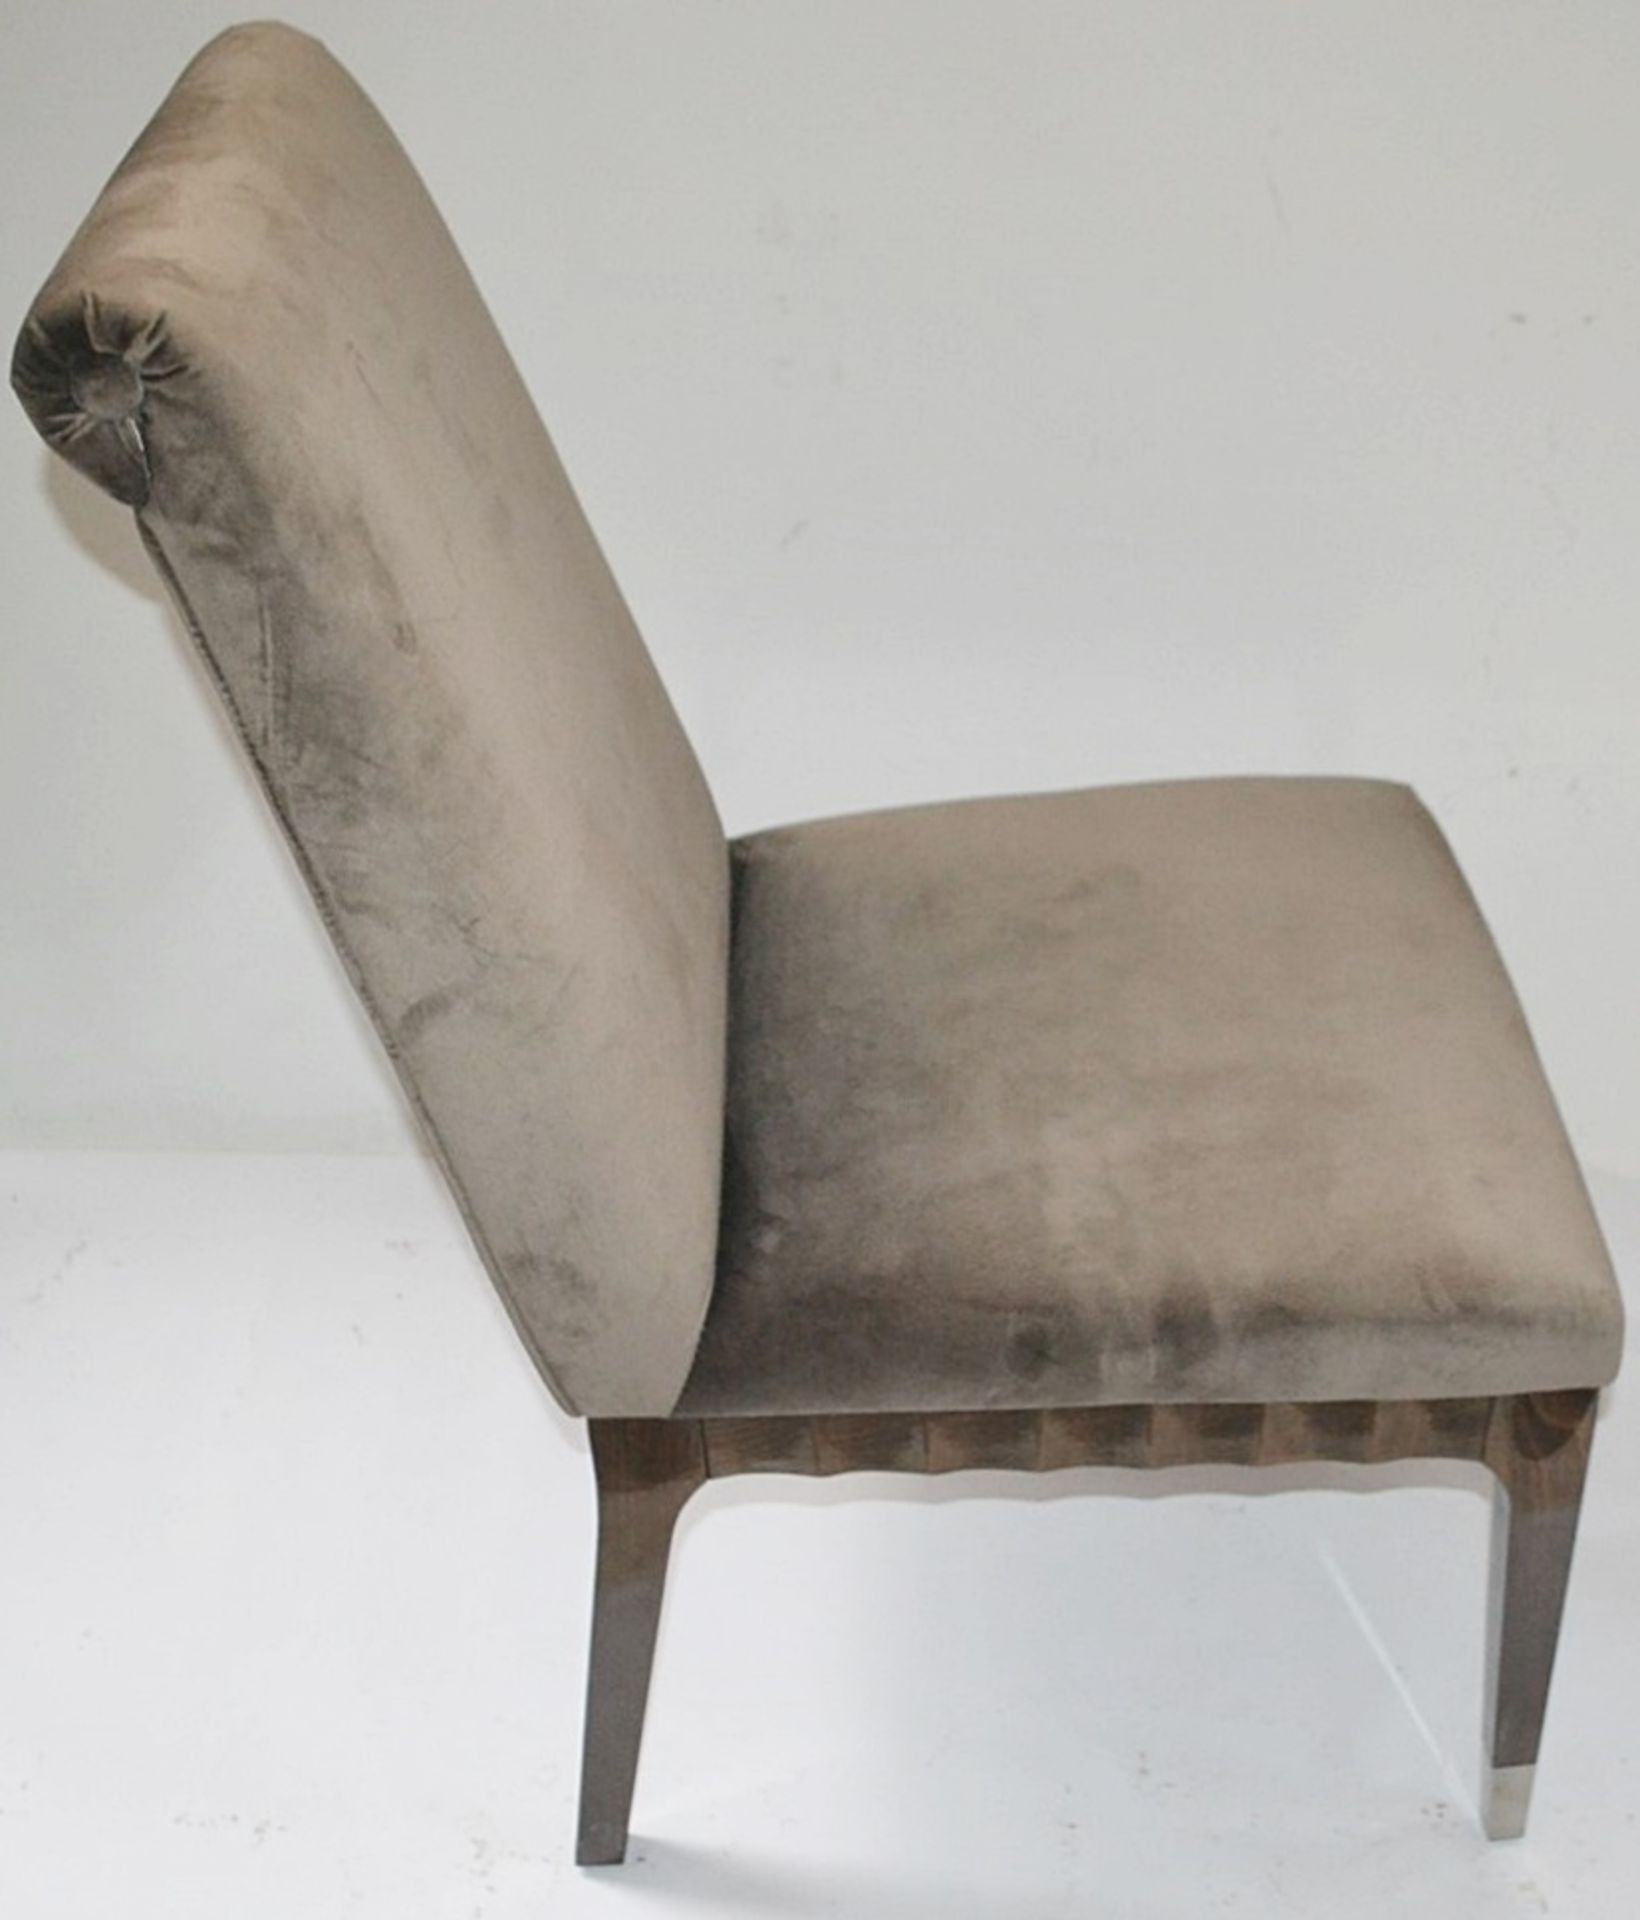 6 x GIORGIO COLLECTION 'Absolute' Italian Designer Dining Chairs - Pre-owned In Good Overall - Image 4 of 16